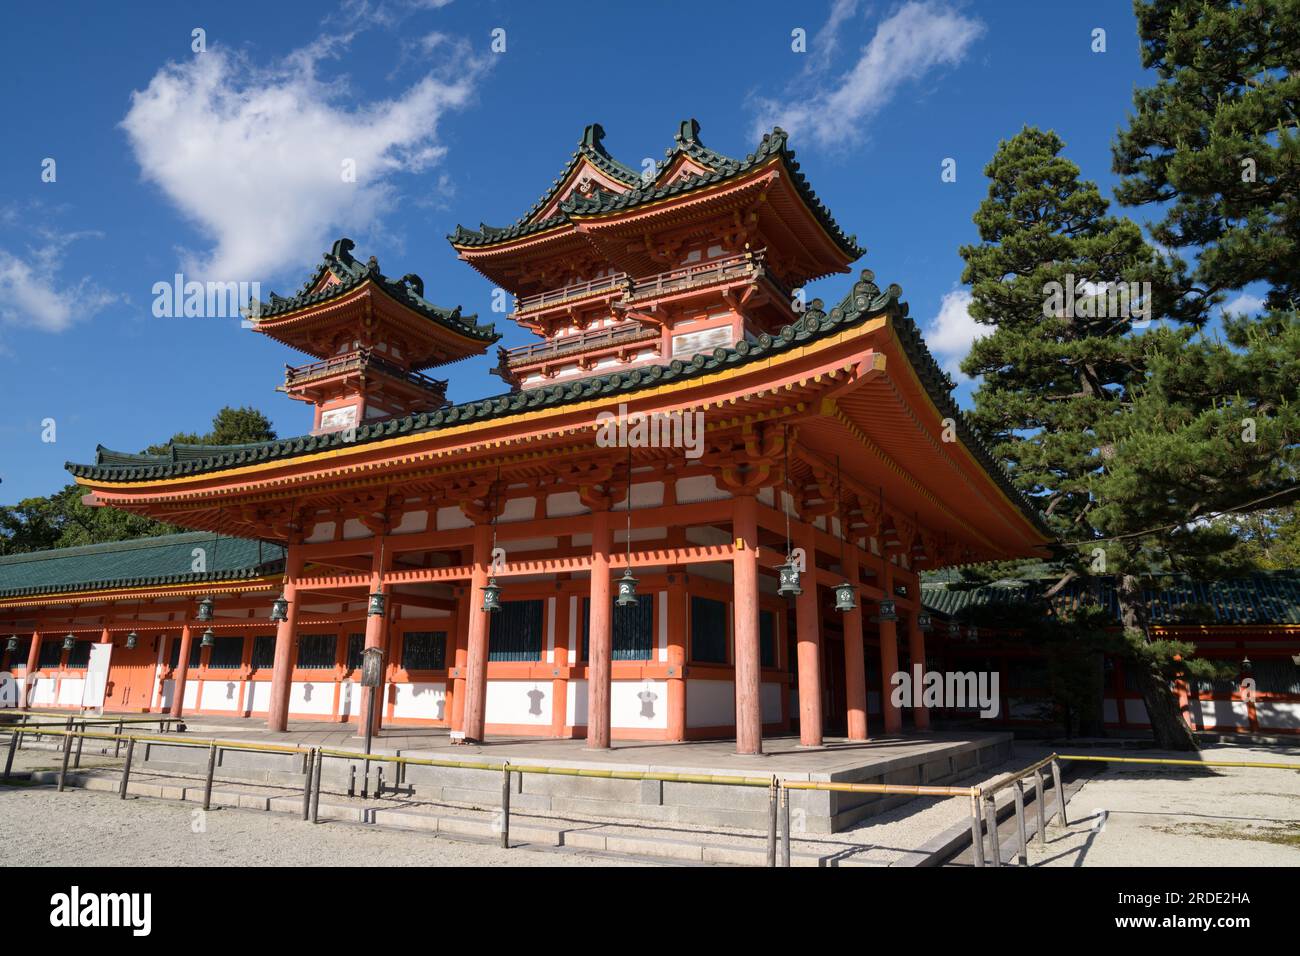 Traditional Japanese temple landmark building at Heian Jingu shinto or buddhist religious shrine seen in Kyoto Japan on a luxury holiday as a tourist Stock Photo